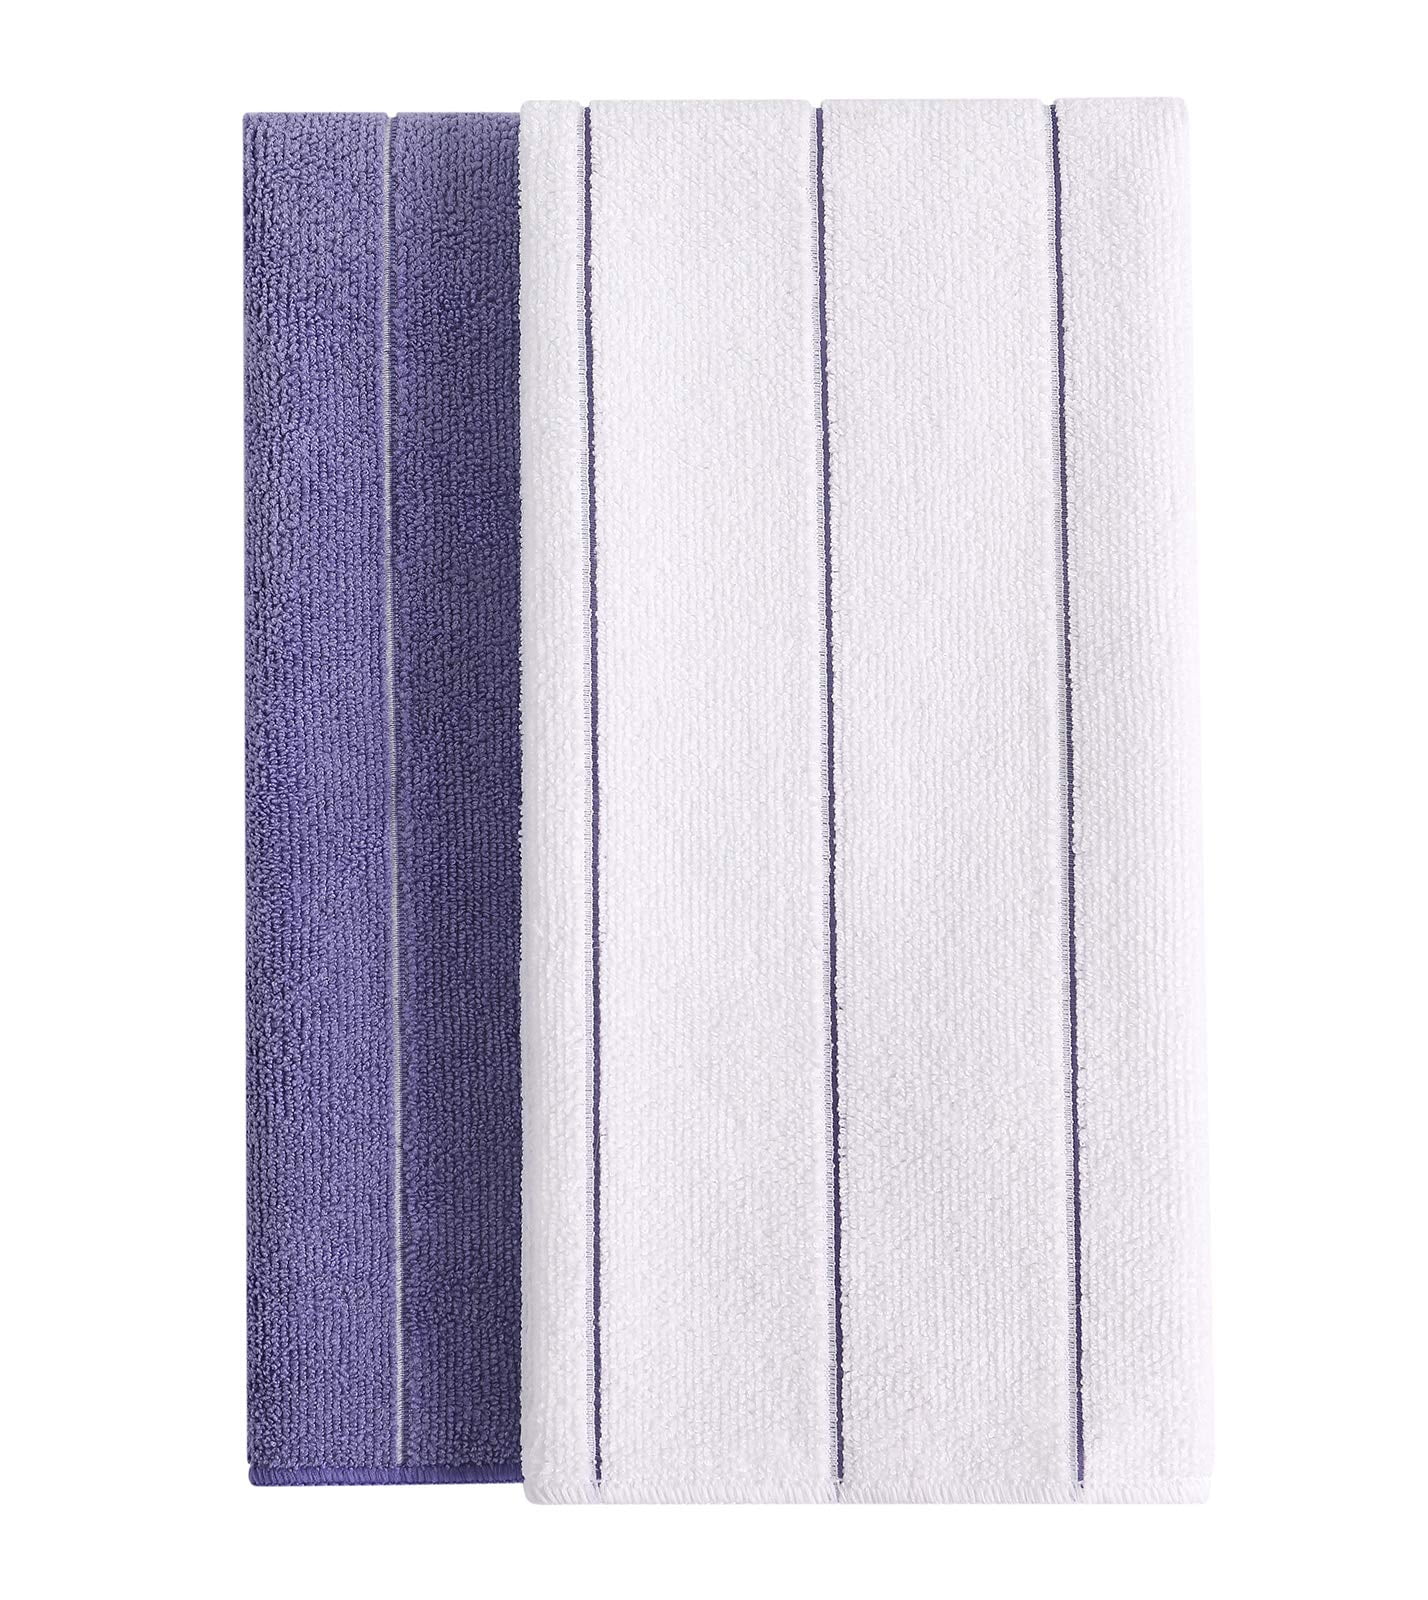 Microfiber Kitchen Towels - Super Absorbent, Soft and Solid Color Dish  Towels, 8 Pack (Stripe Designed Purple and White Colors), 26 x 18 Inch  (Purple) 